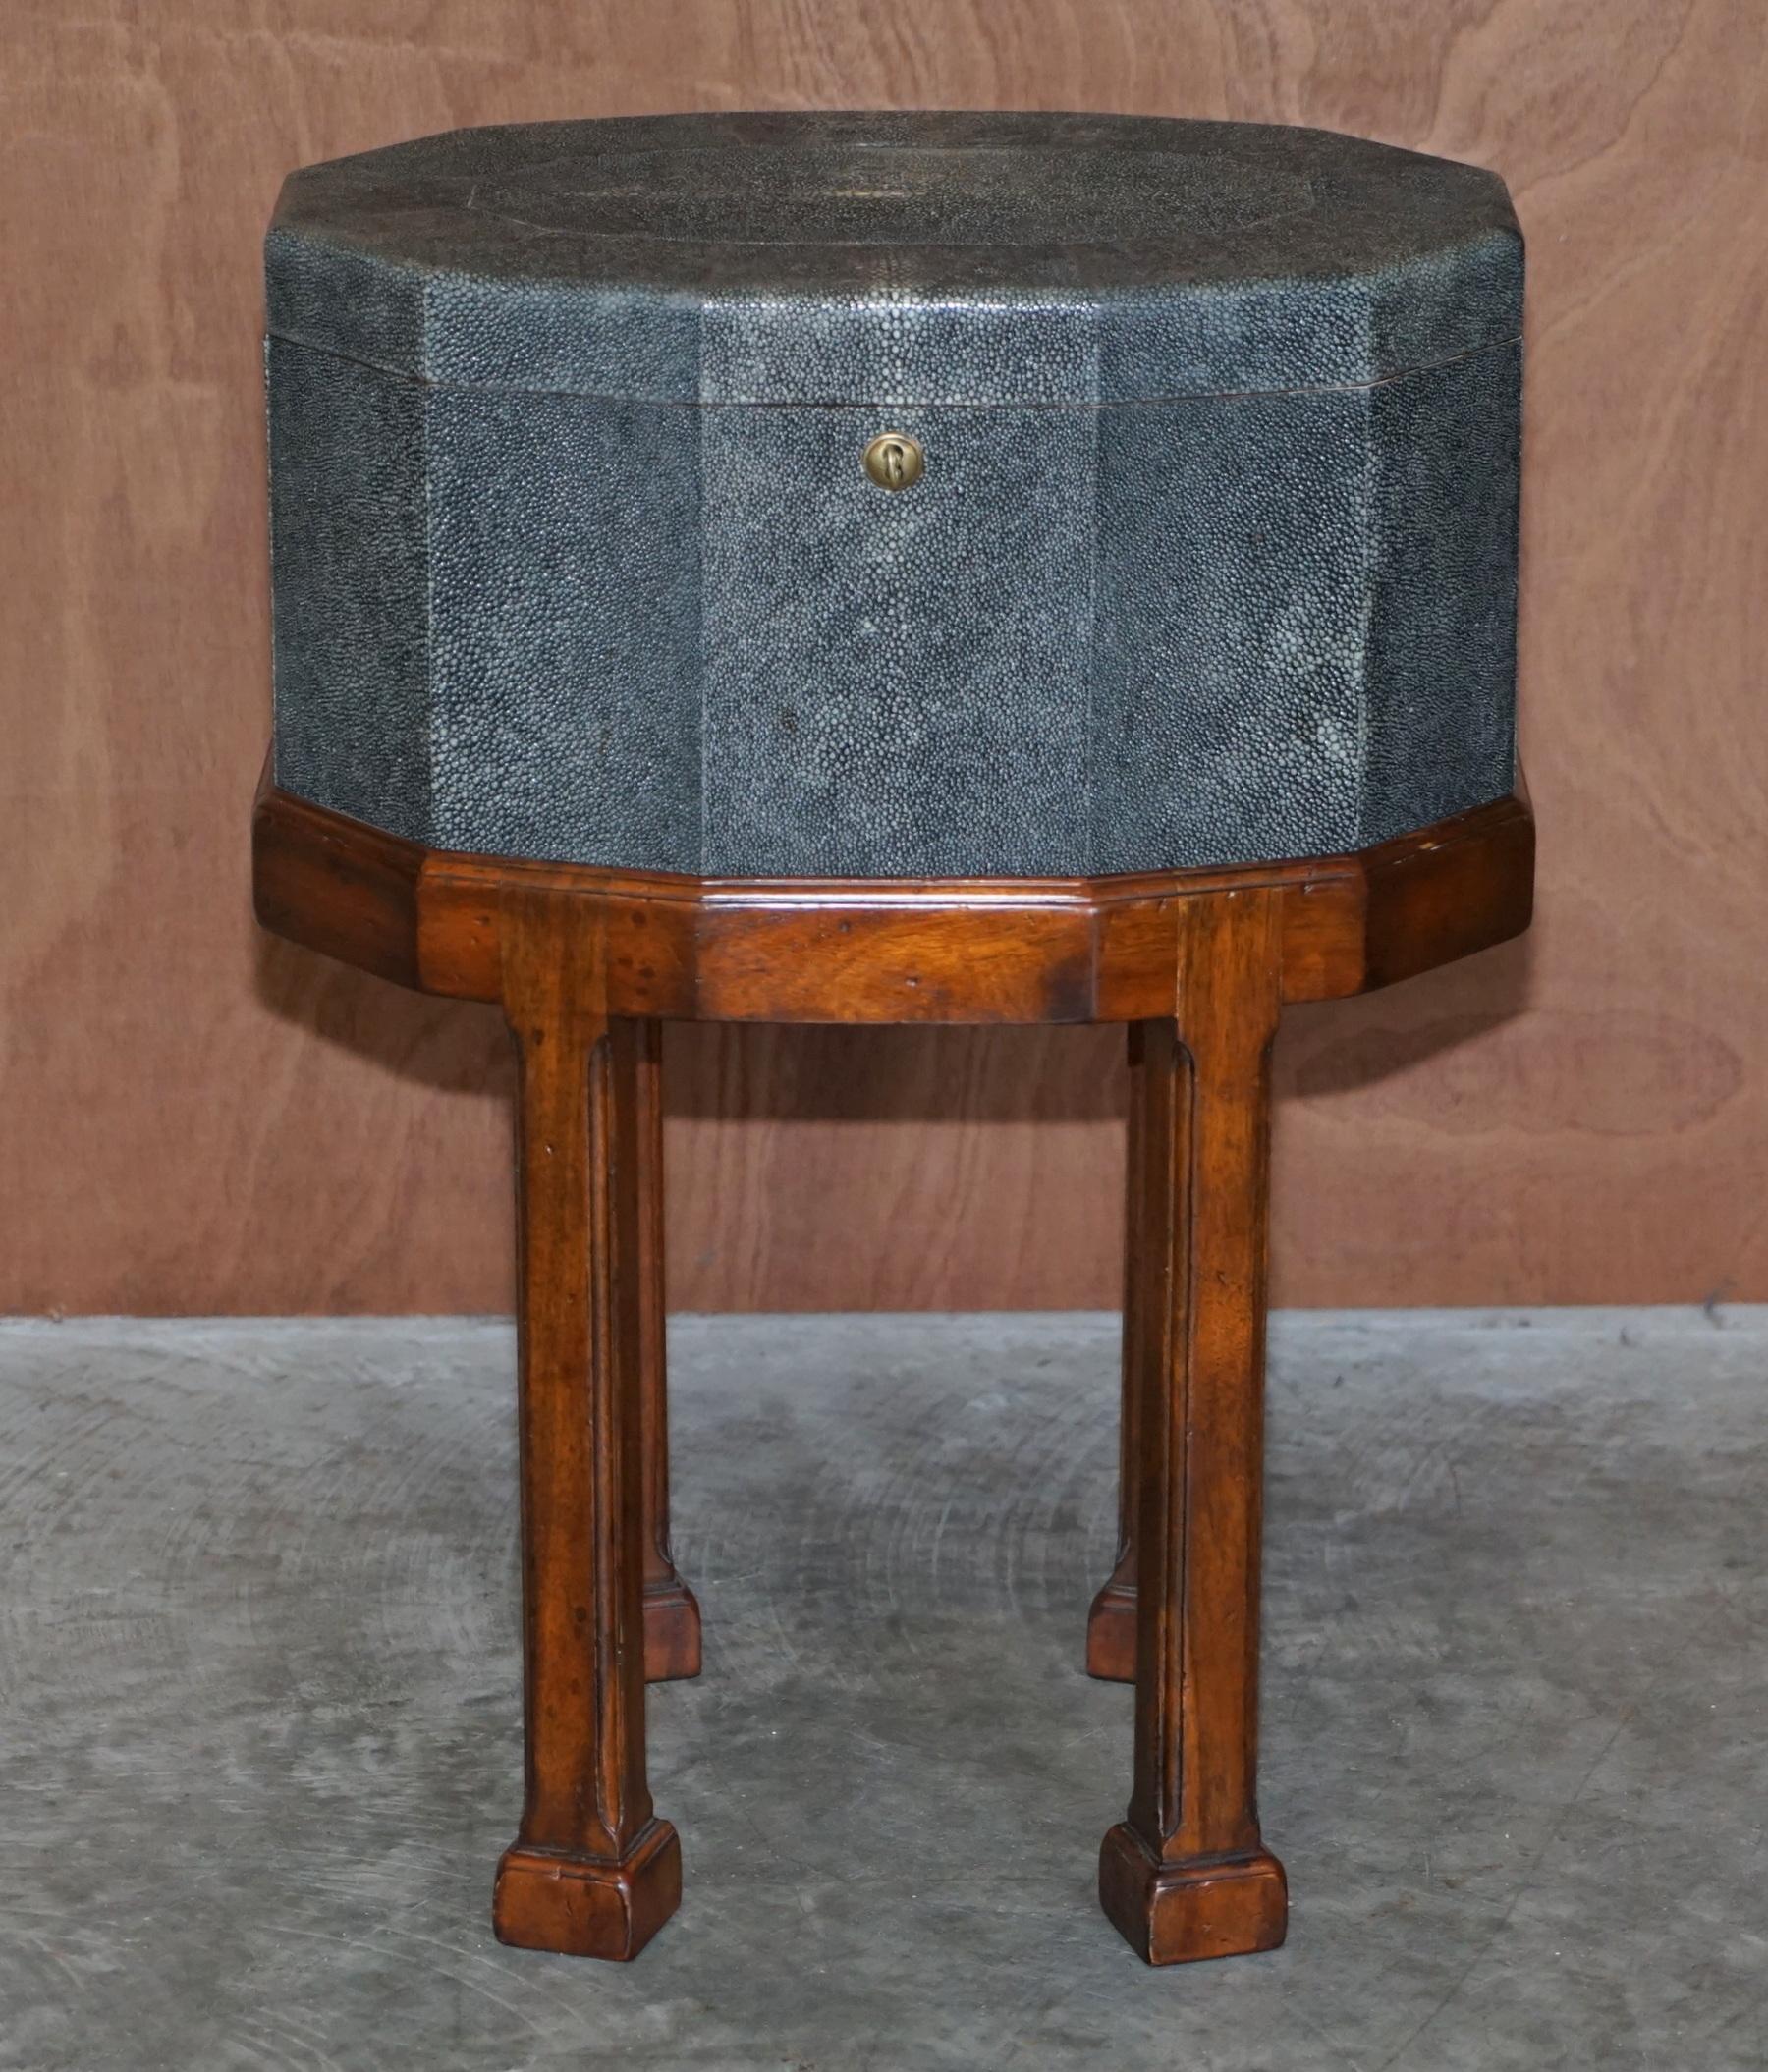 We are delighted to offer this very rare and highly collectable Shagreen (Shark Skin) upholstered flamed mahogany side table sized chest

This is one of the nicest looking pieces I’ve had in stock for some time, the timber patina is glorious